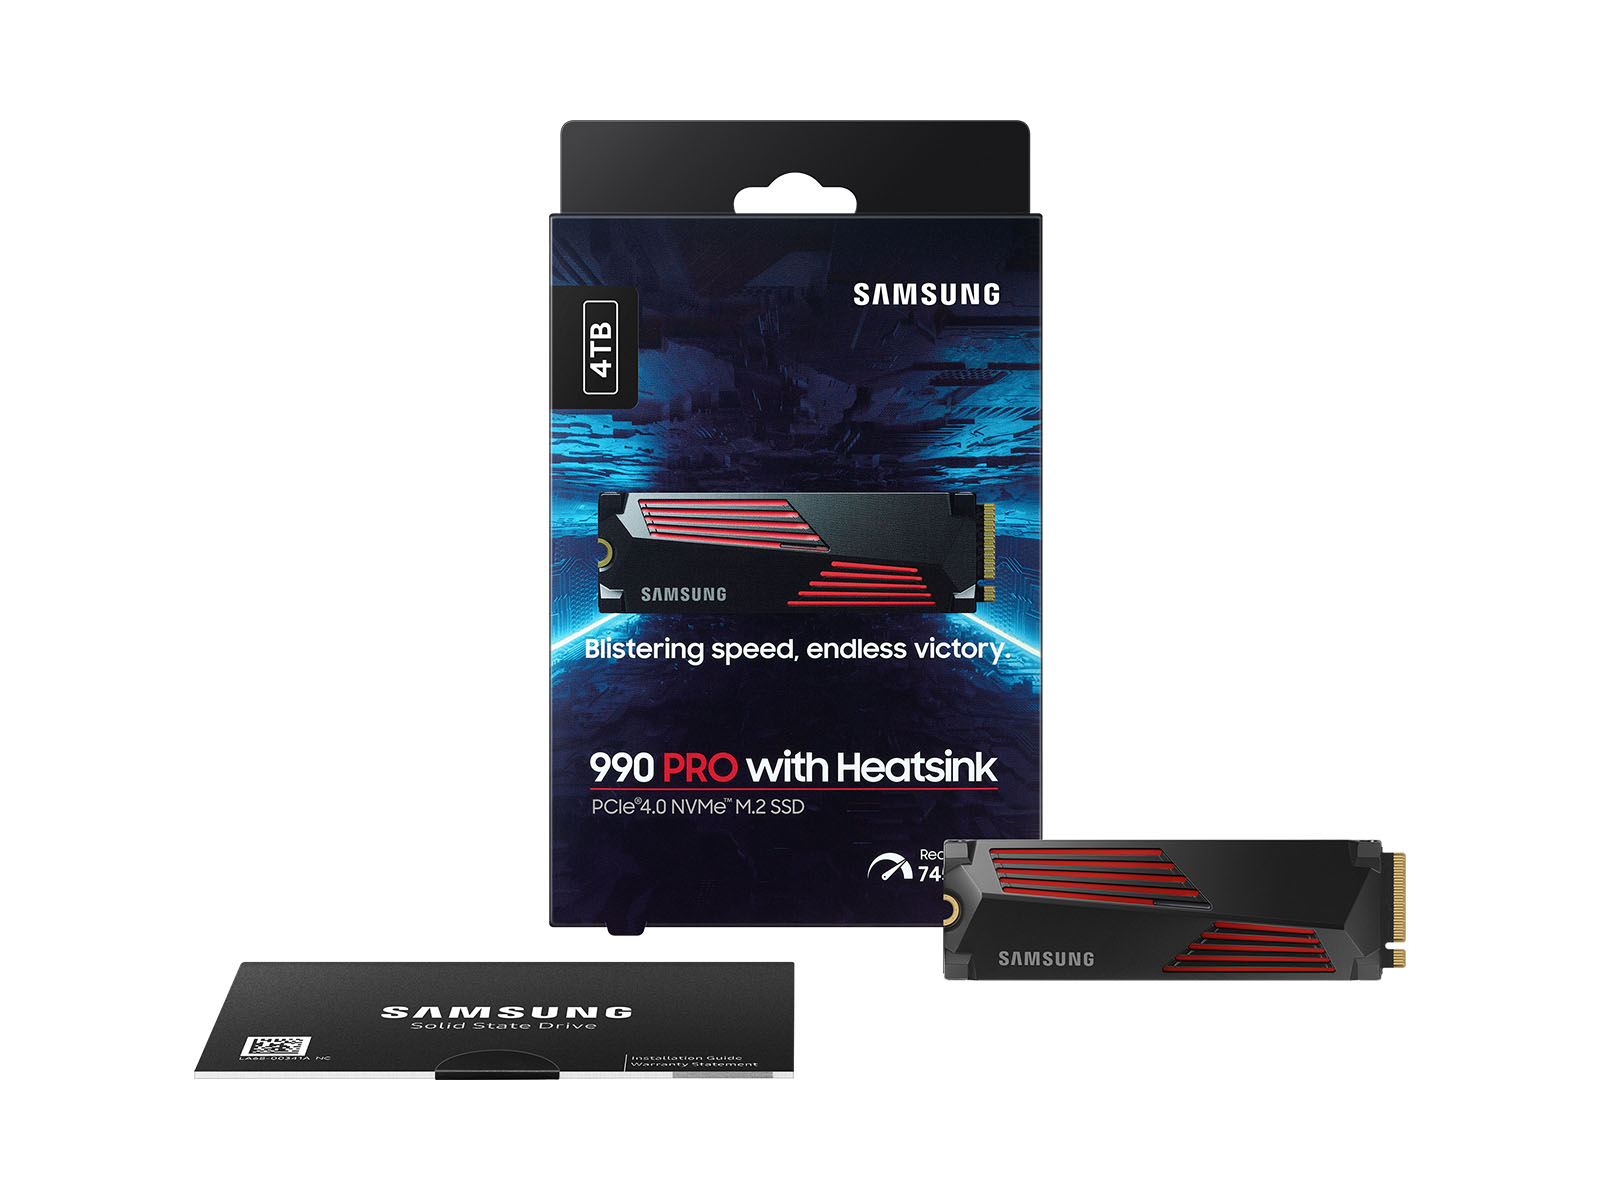 Samsung 980 PRO 2TB 1TB SSD Solid State Drive w/Heatsink For PS5 PCIe 4.0  NVMe